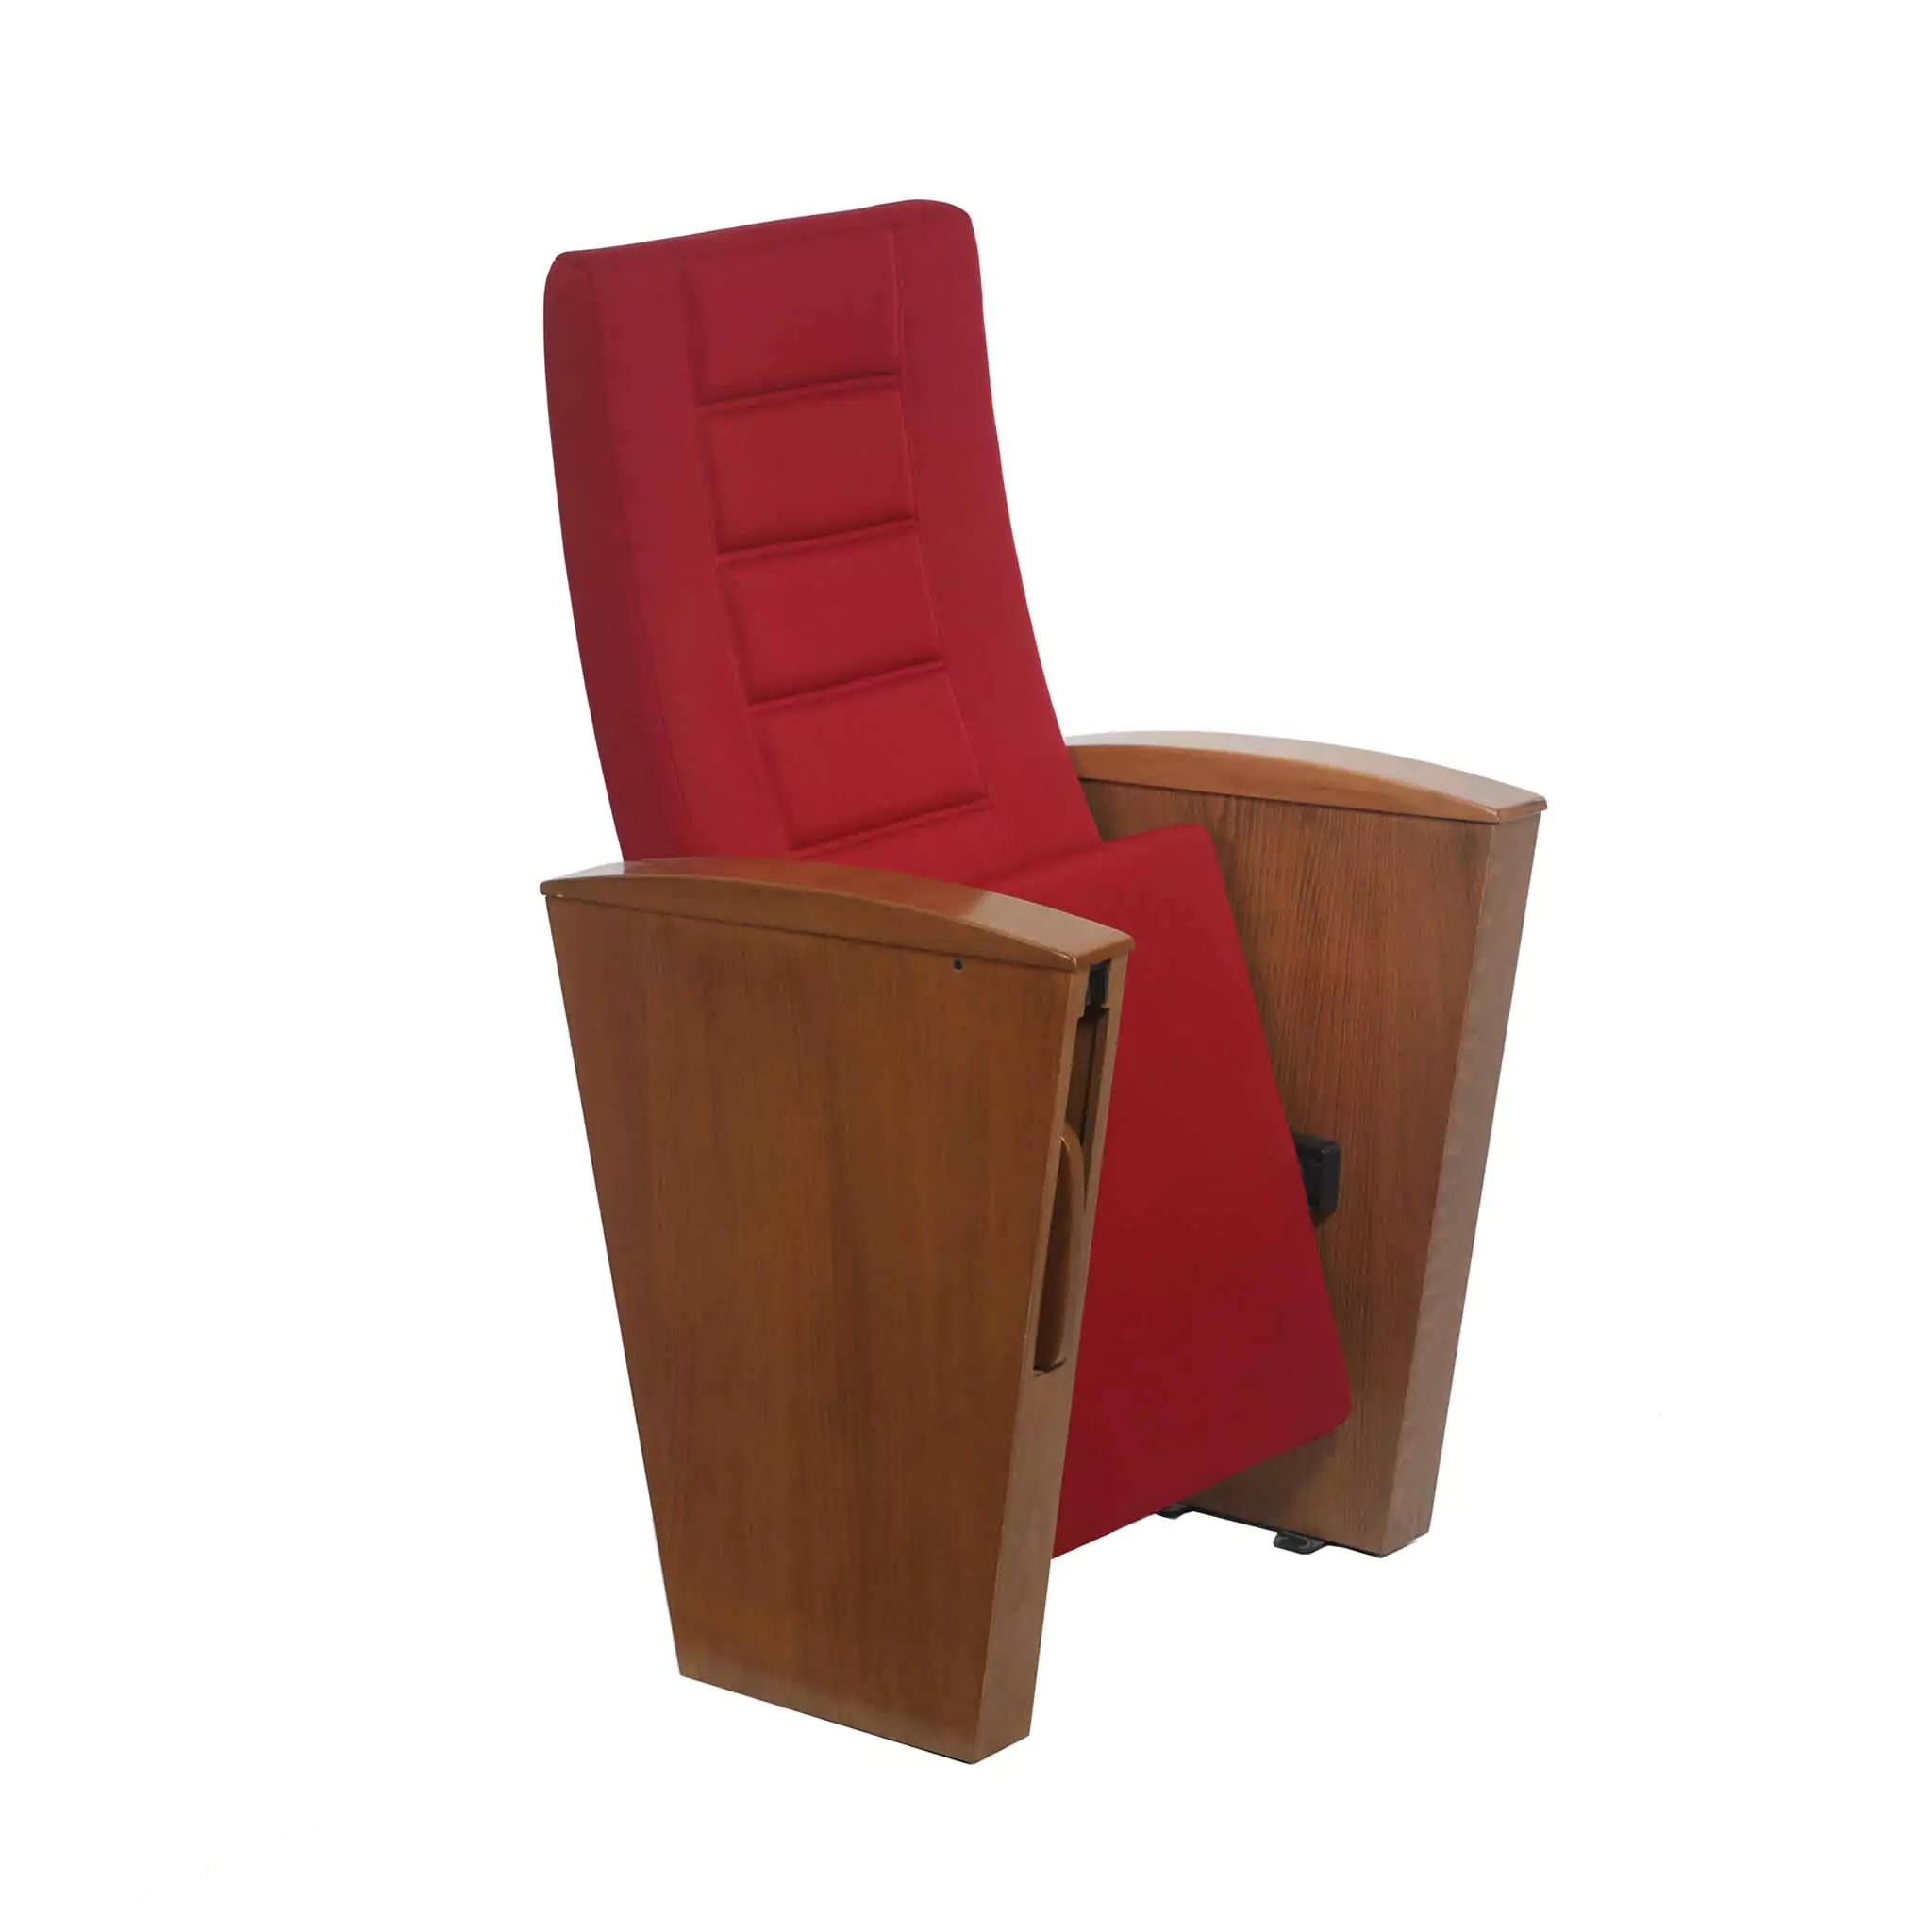 Simko Seating Product Conference Seat Pirit XL 03